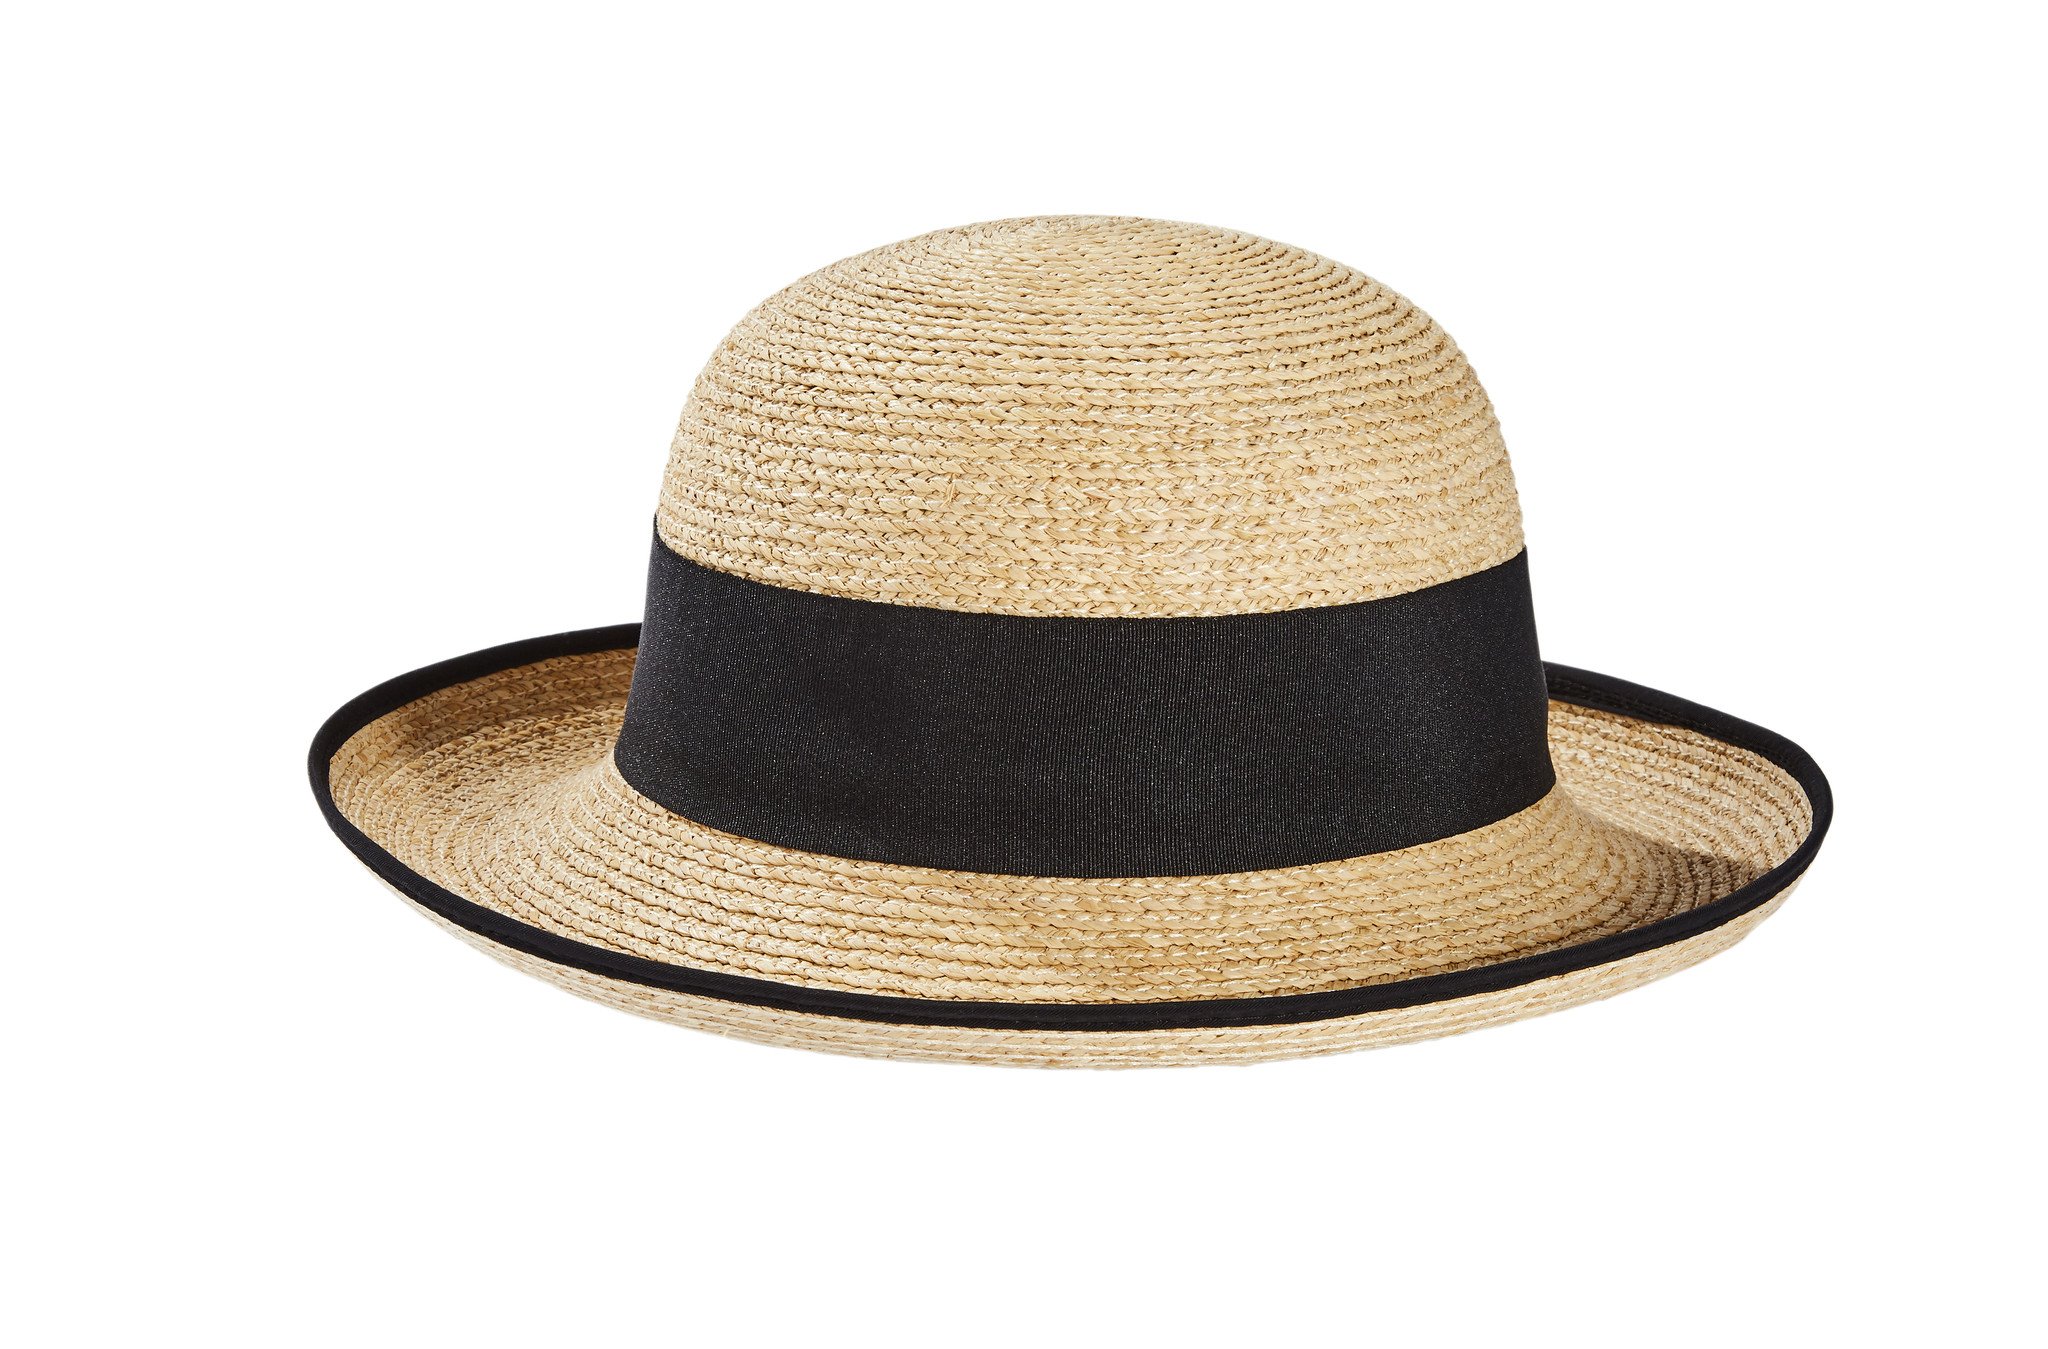 Buy Lady Sun Caps Ribbon Round Flat Top Straw Hat Summer Hats For